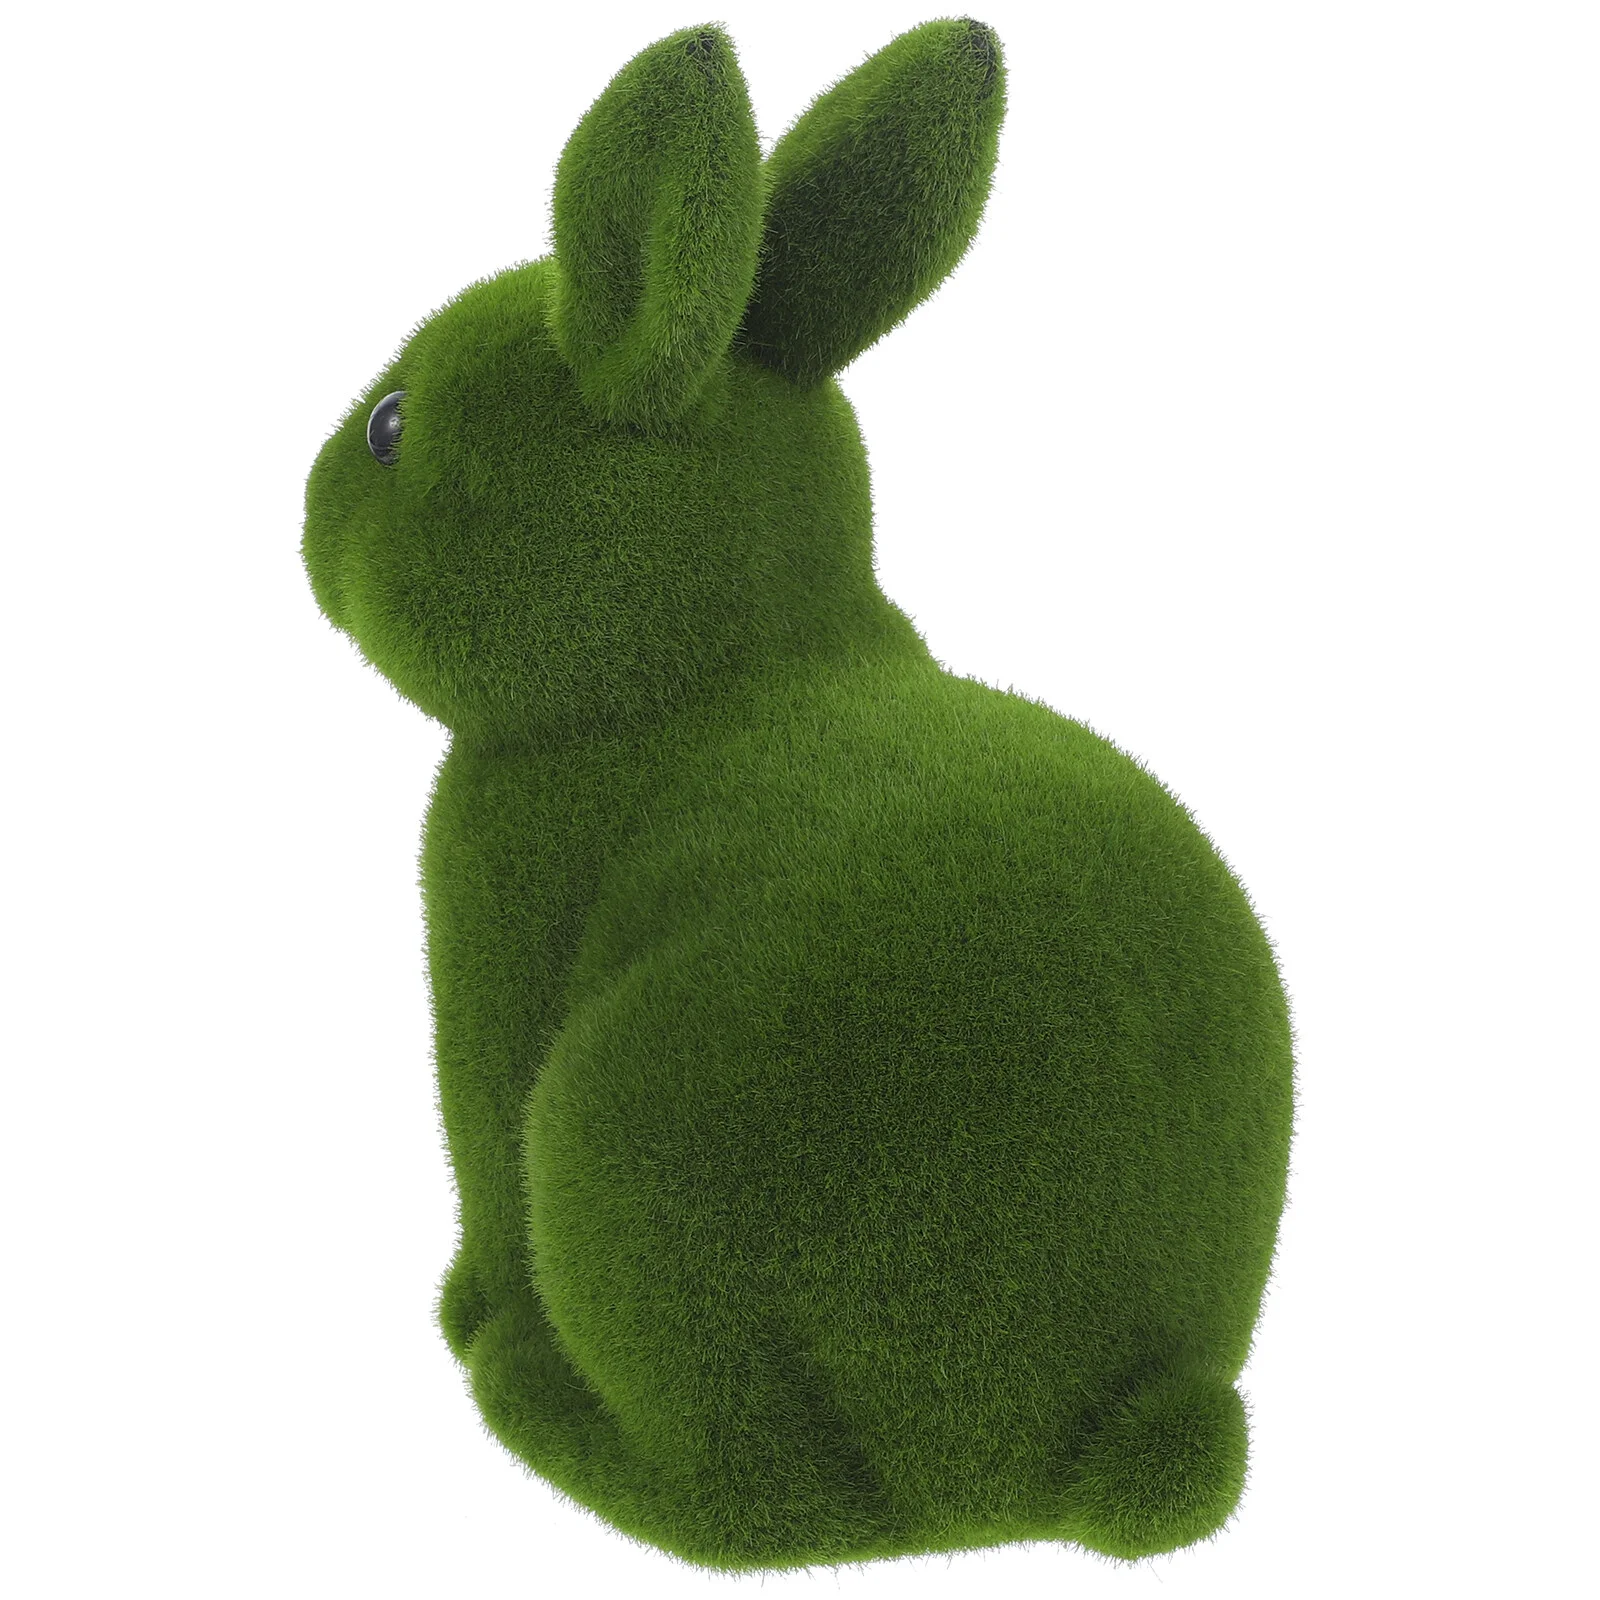 Easter Bunny Party Rabbit Decor Mini Stuffed Moss Ball Ornament Outdoor Spring Decorations